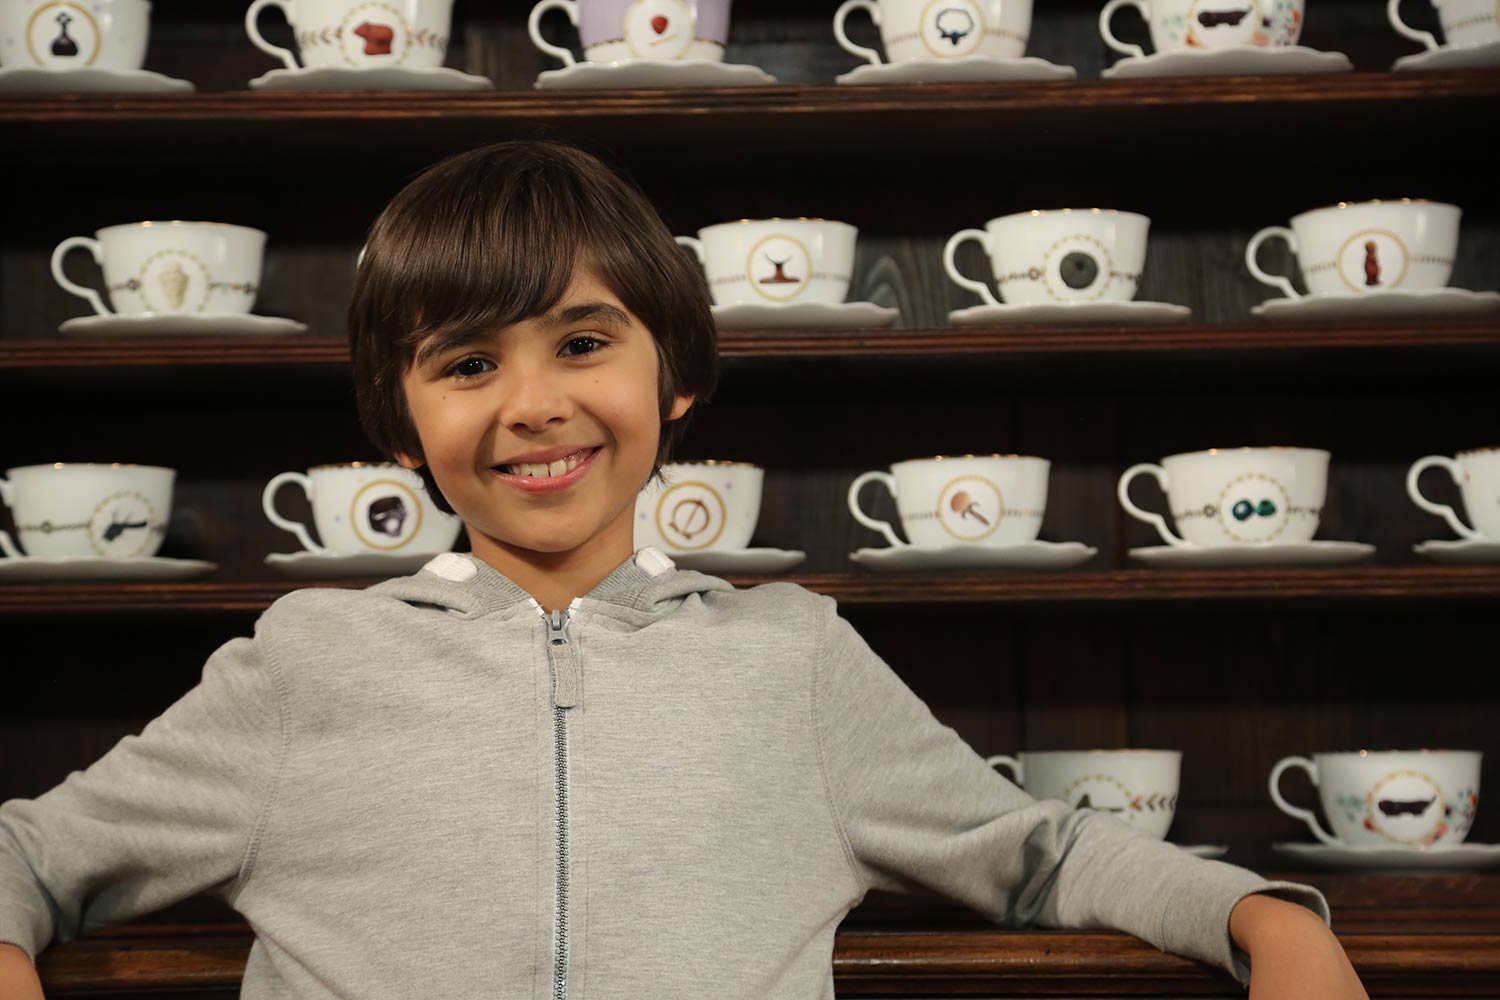 Lokesh-in-front-of-the-teacup-cup-cabinet.jpg